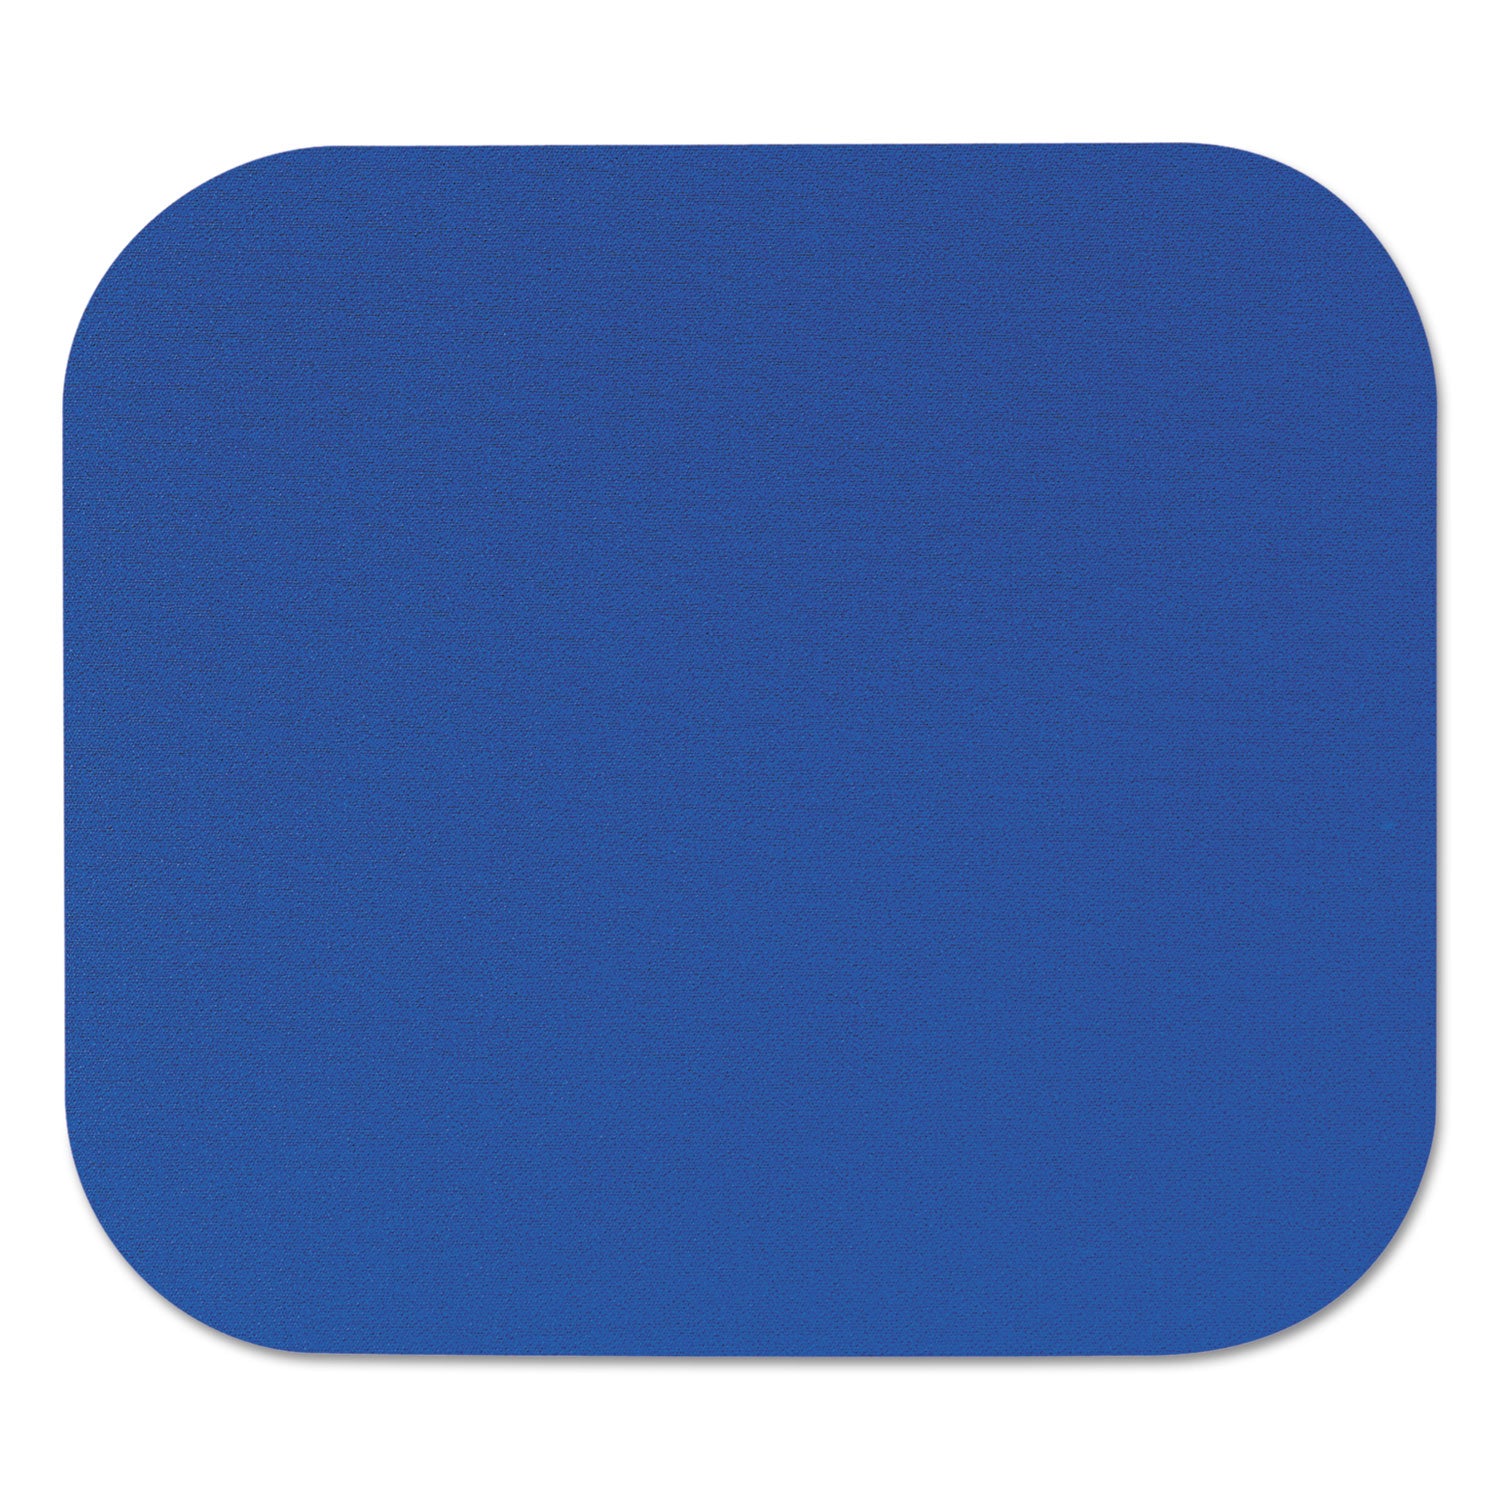 Polyester Mouse Pad, 9 x 8, Blue - 1